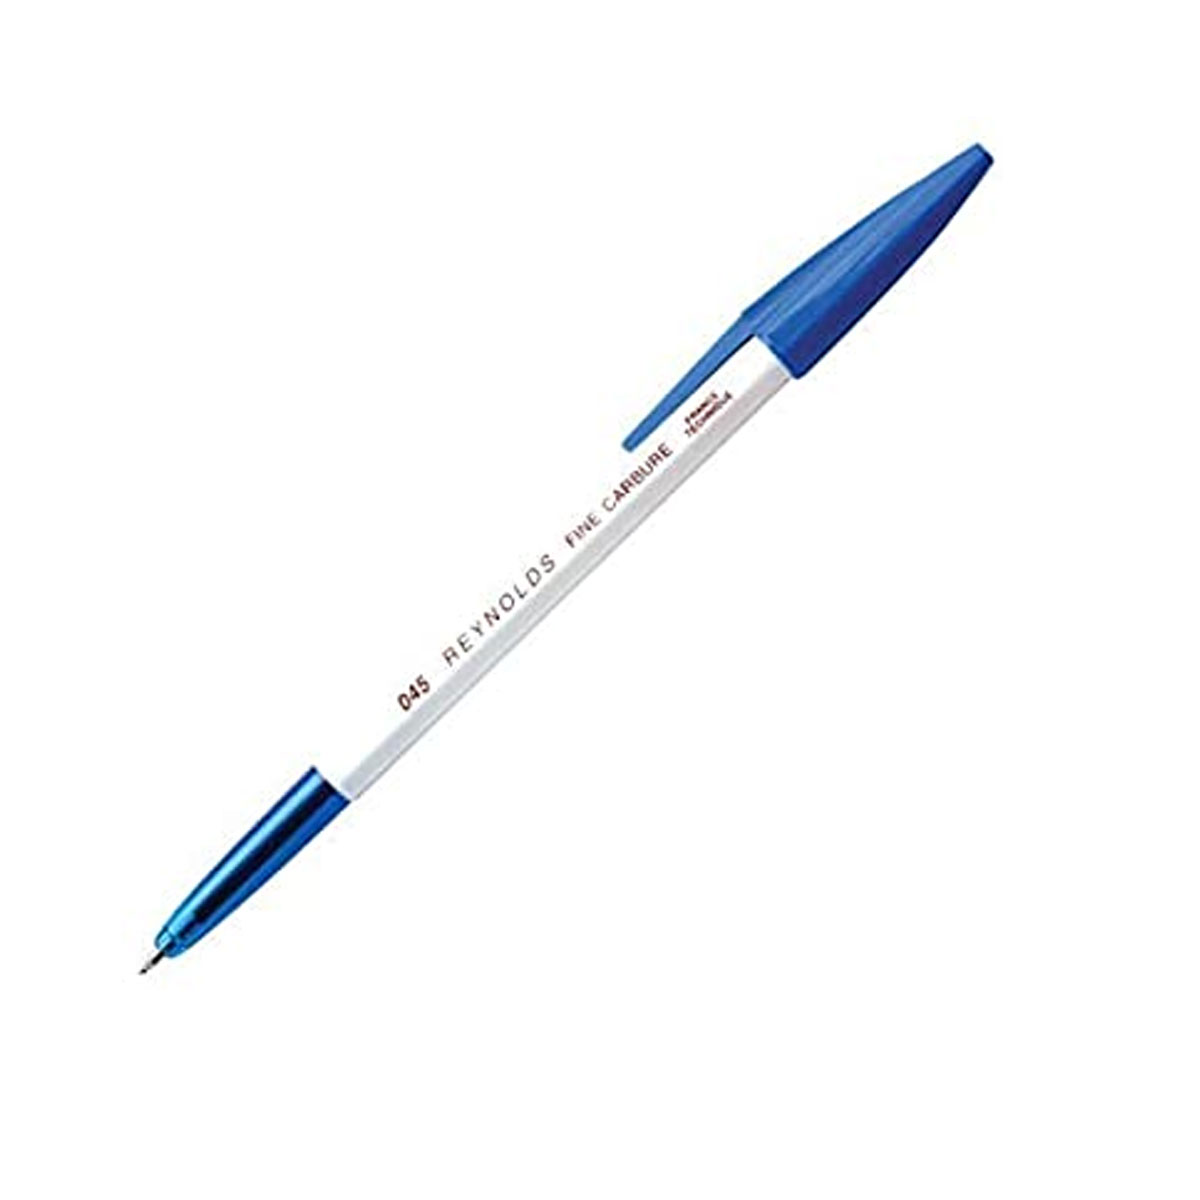 Reynolds 045  Fine carbure white body with Blue Cap Type Ball Pen  SKU 11984